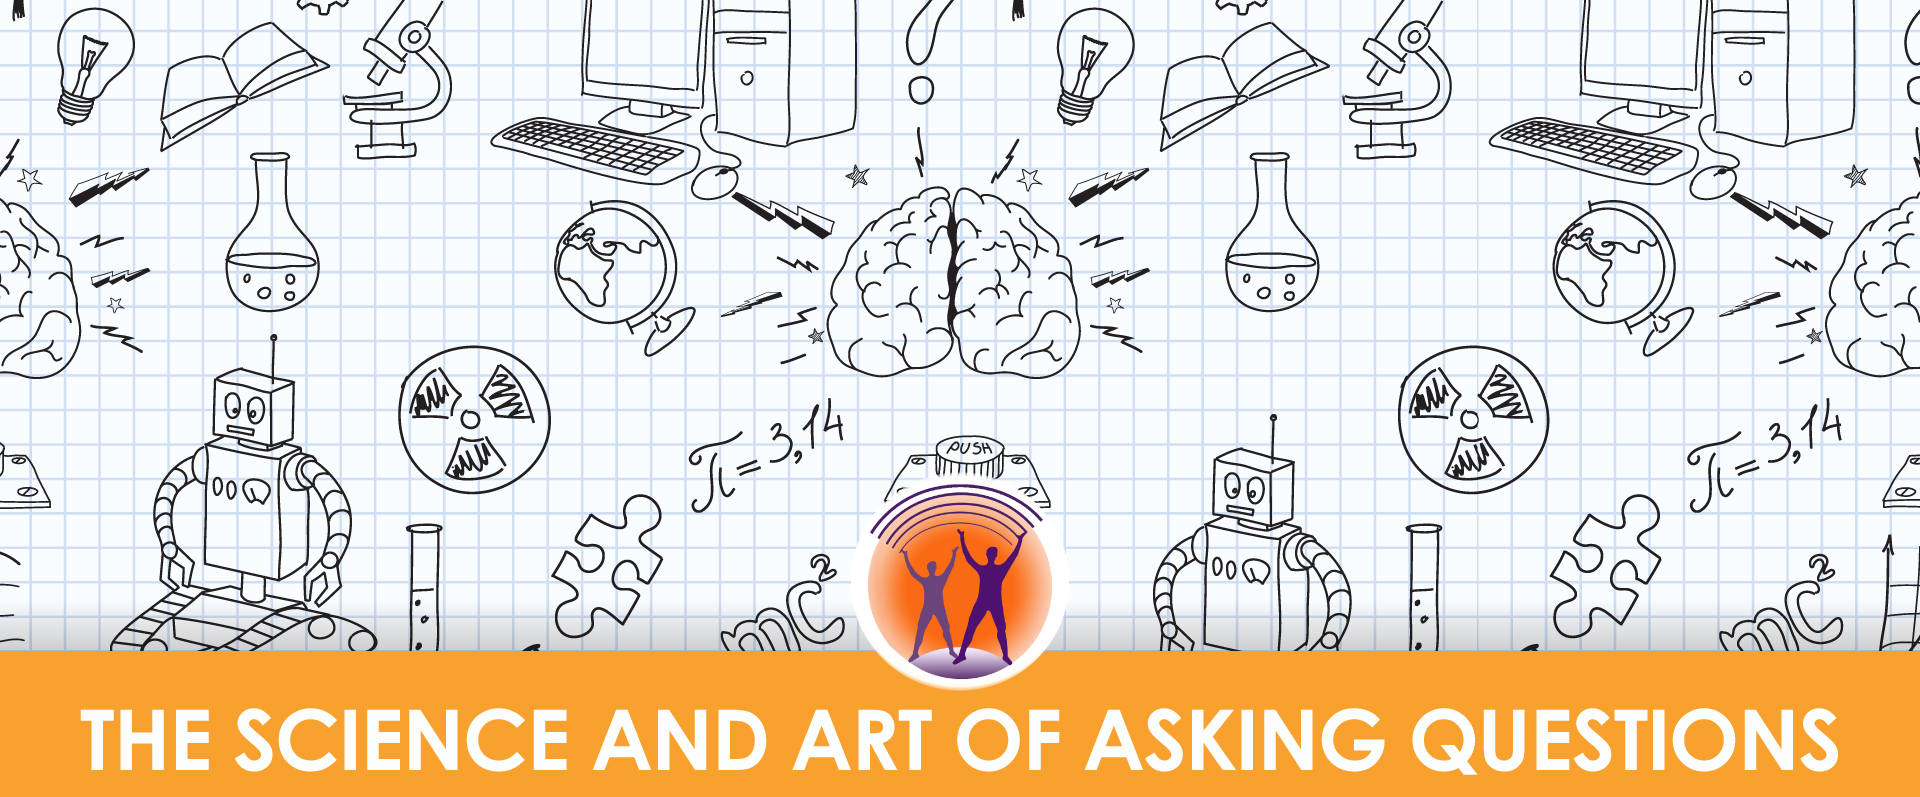 The Science and Art of Asking Questions